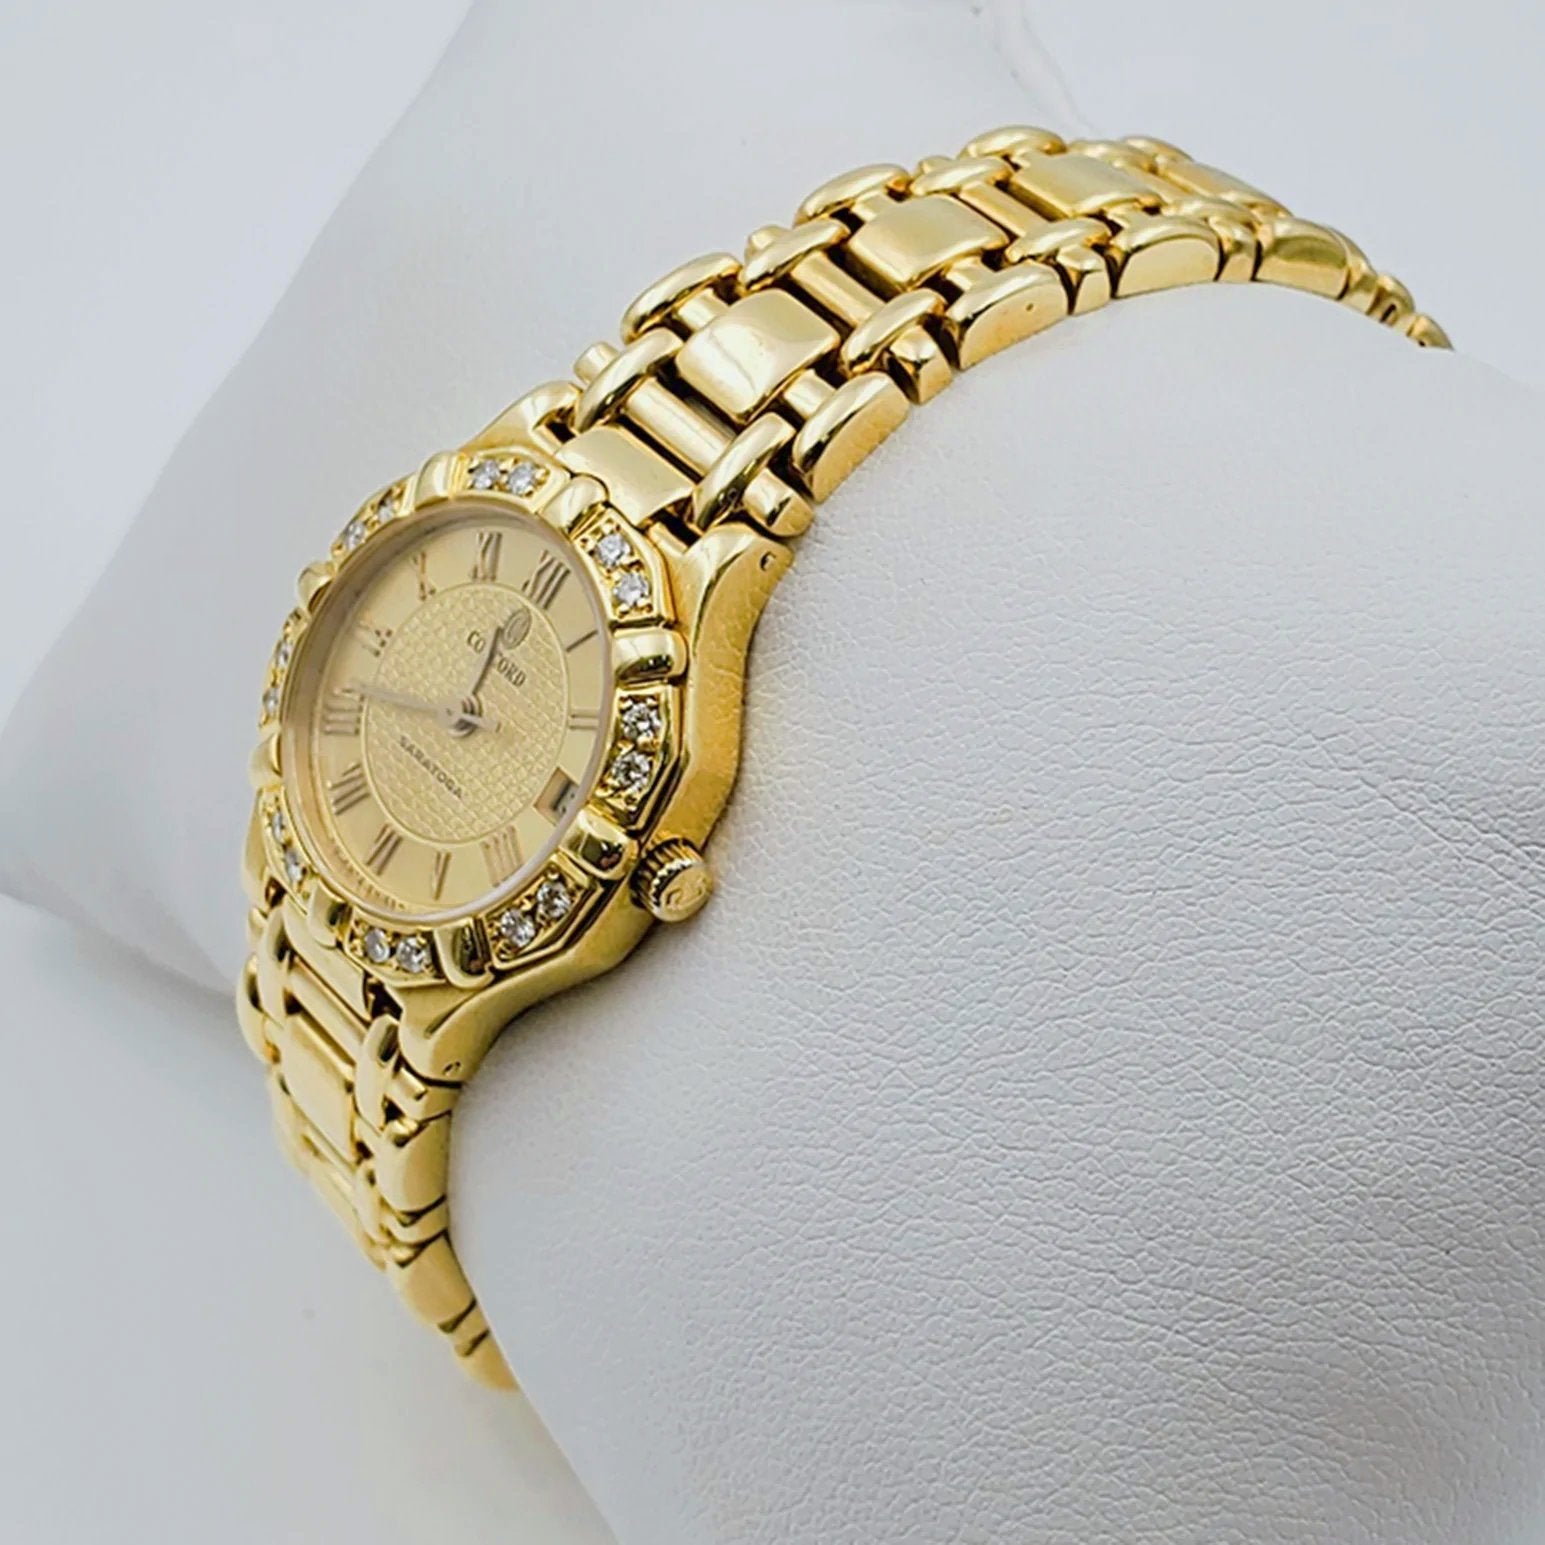 Women's Concord Sarento 24mm Solid 18K Yellow Gold Band Watch with Roman Numeral Gold Dial and Diamond Bezel. (Pre-Owned)